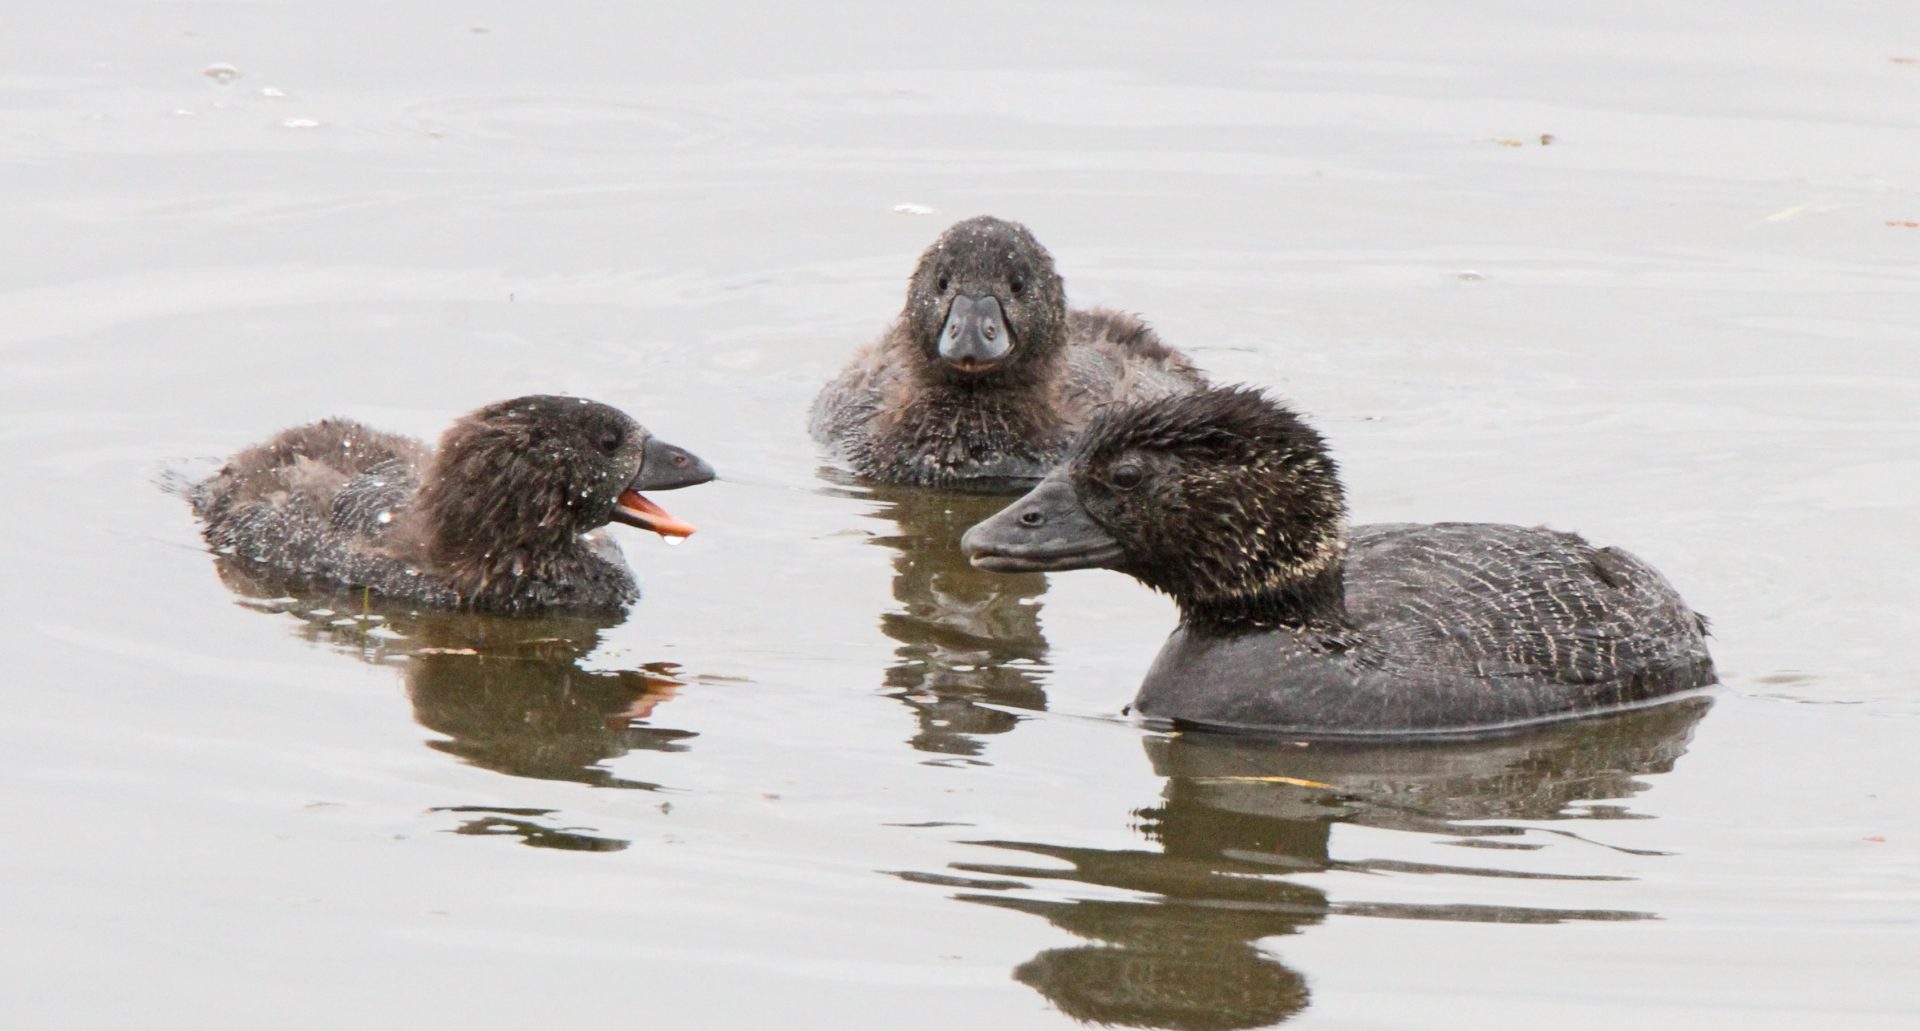 Photograph of Female Musk Duck with two demanding ducklings